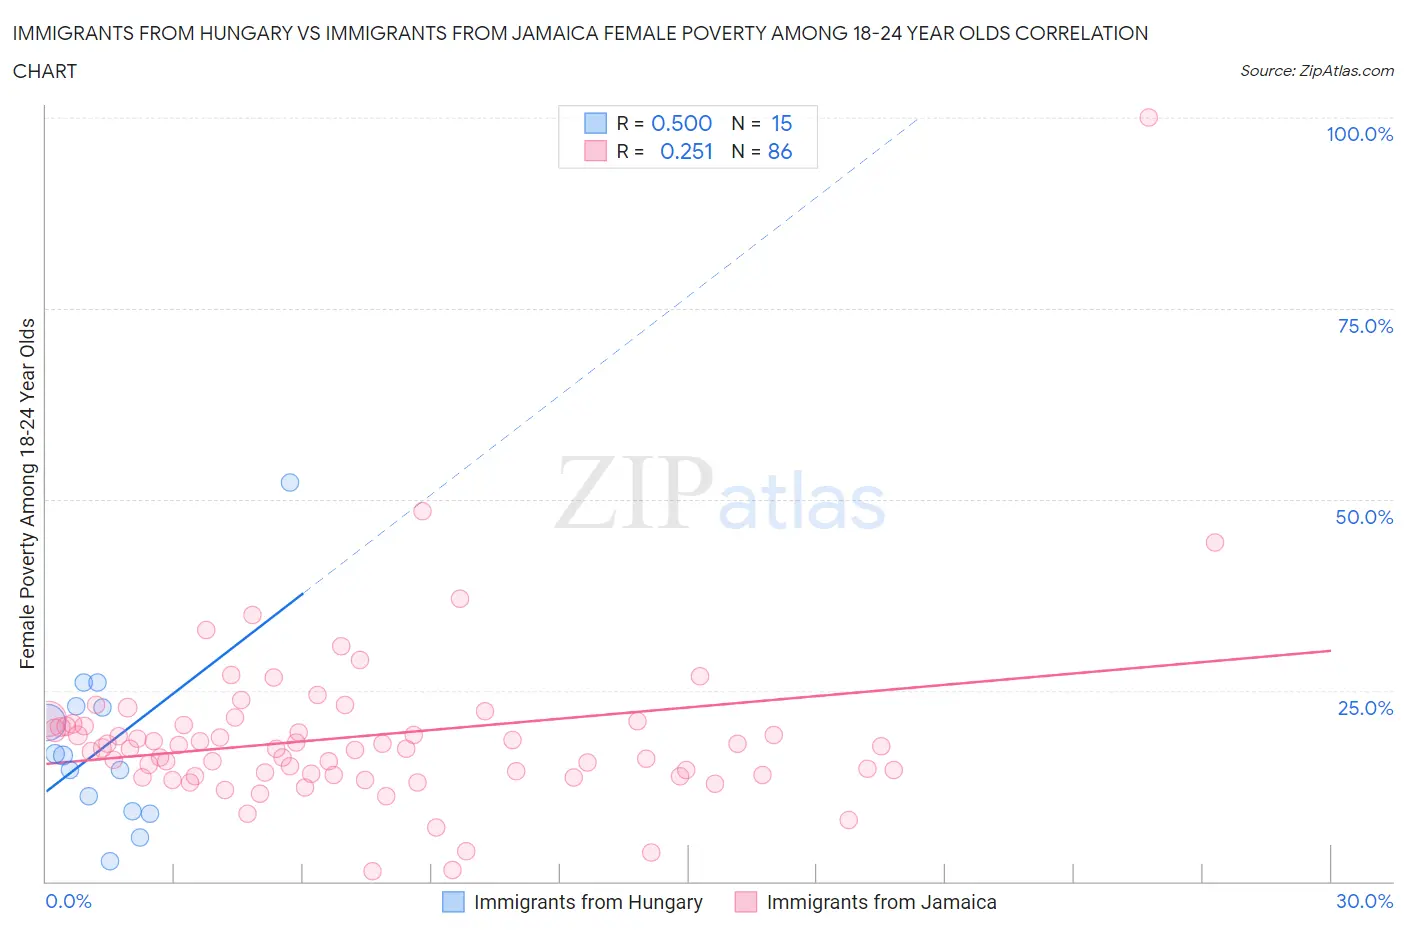 Immigrants from Hungary vs Immigrants from Jamaica Female Poverty Among 18-24 Year Olds